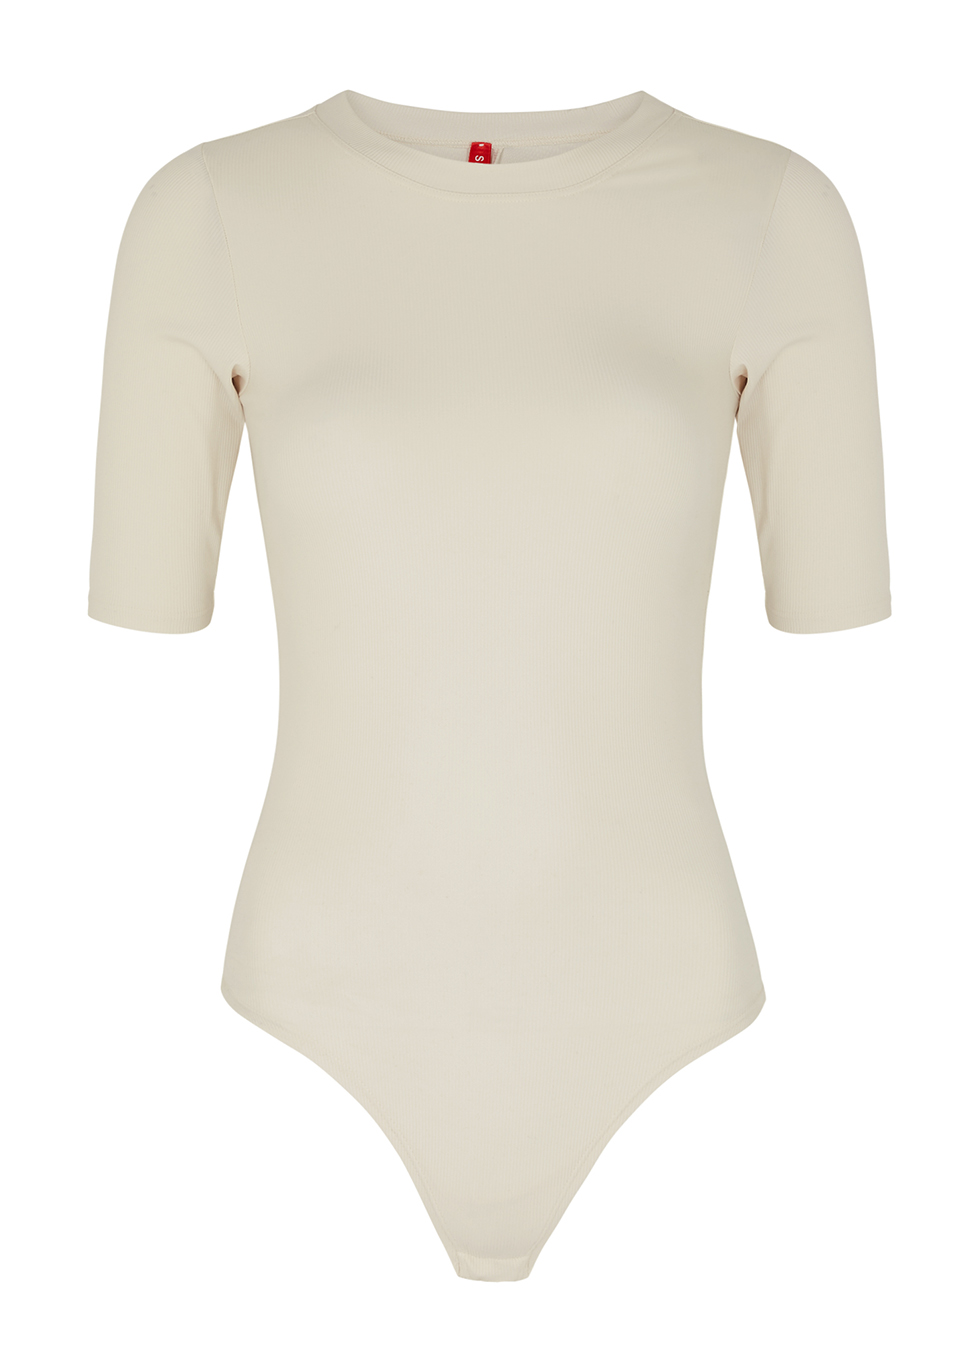 suit yourself ribbed stretch-jersey bodysuit